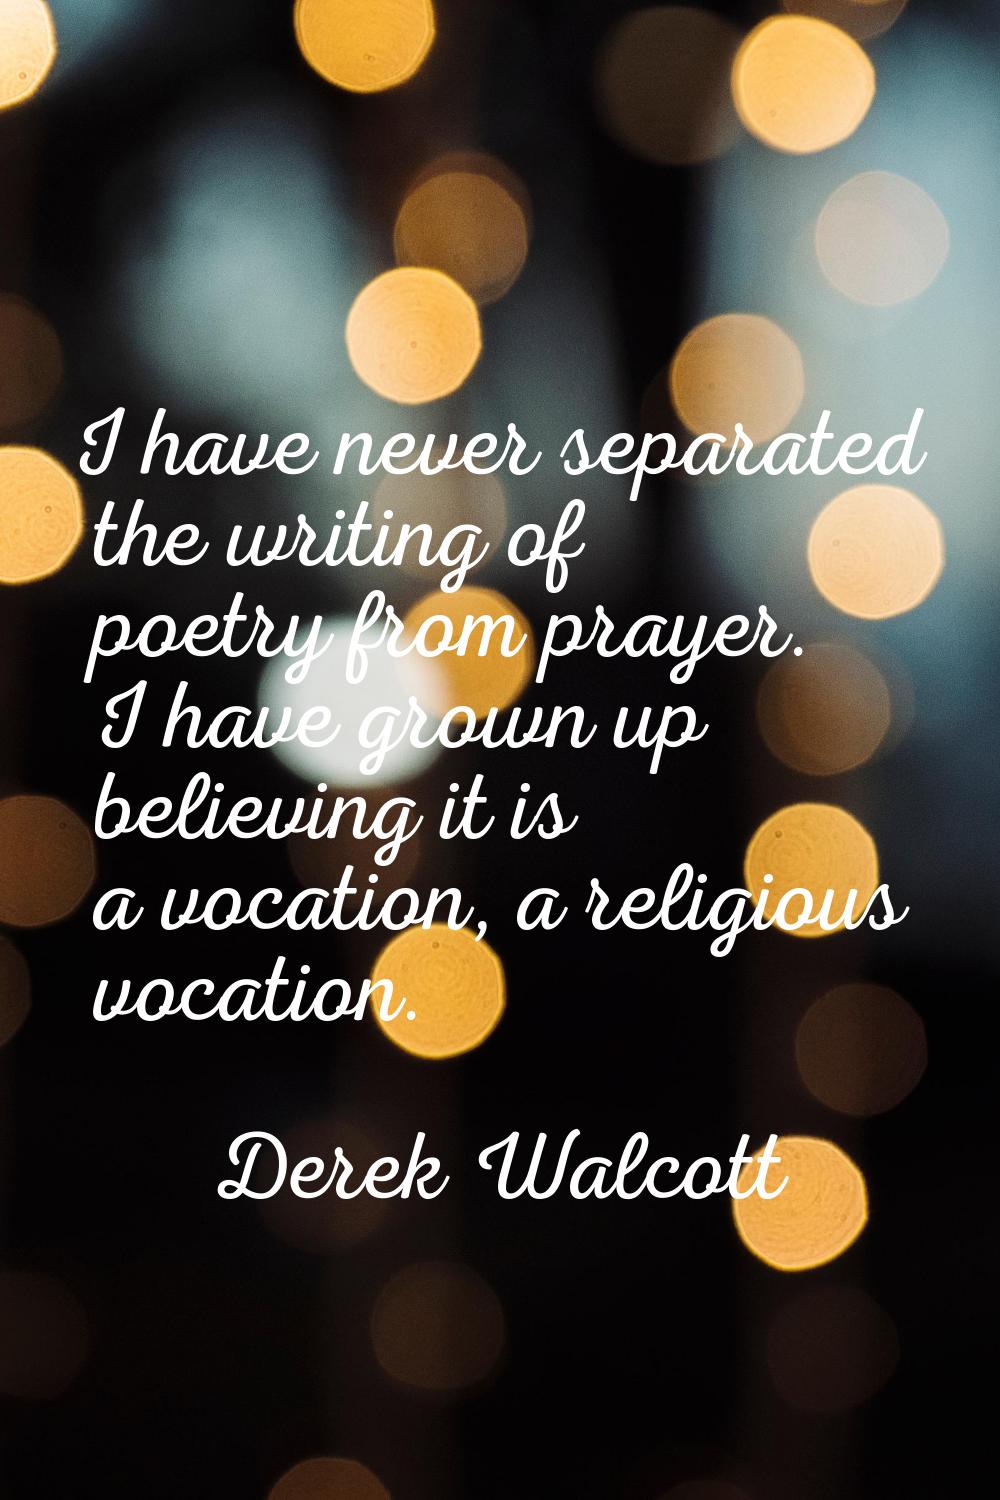 I have never separated the writing of poetry from prayer. I have grown up believing it is a vocatio